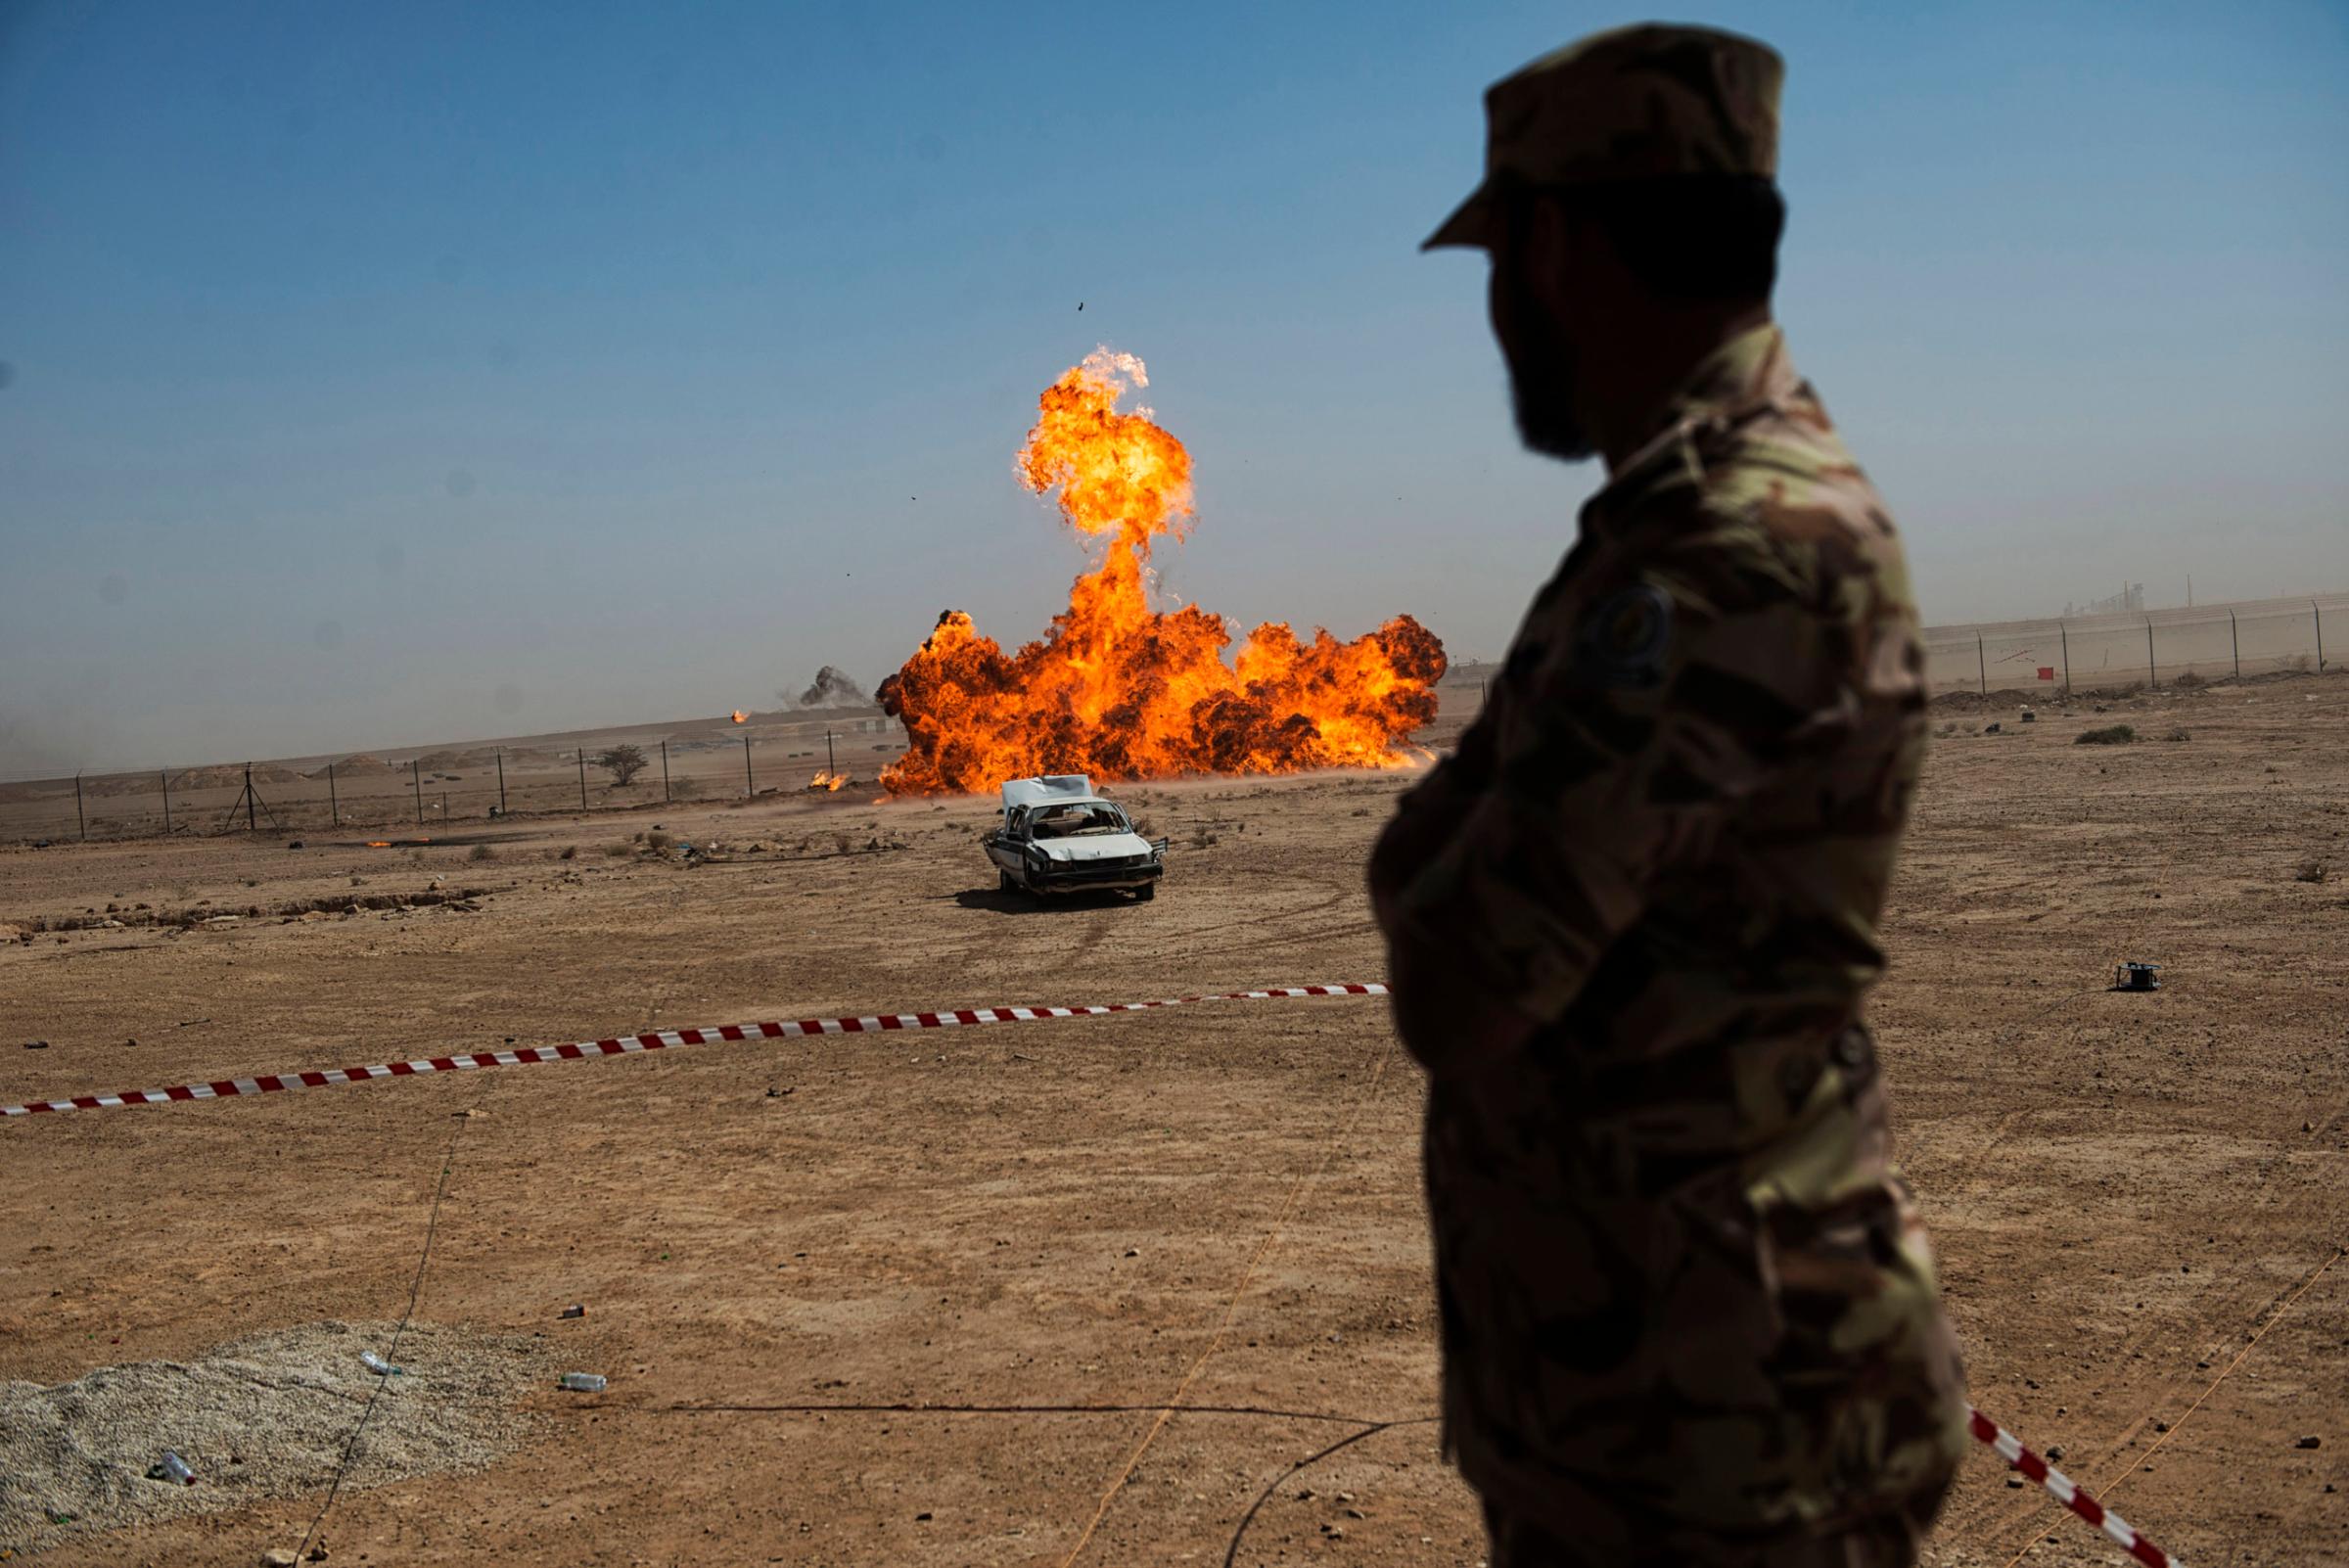 A troop with the Saudi Special Security Forces watches a remote detonation at the Counter-Terrorism Training School camp under the Ministry of Interior in Riyadh, Saudi Arabia, March 5, 2013.  The Saudi government has been fighting terrorism within the Kingdom for decades, and has roughly 3,000 SEF in Riyadh, alone.  Despite a fraugh relationship with the United States in the past, Saudi Arabia and the U.S. have routinely shared security information in order to prevent and fight terrorism.   (Credit: Lynsey Addario/ Getty Reportage)